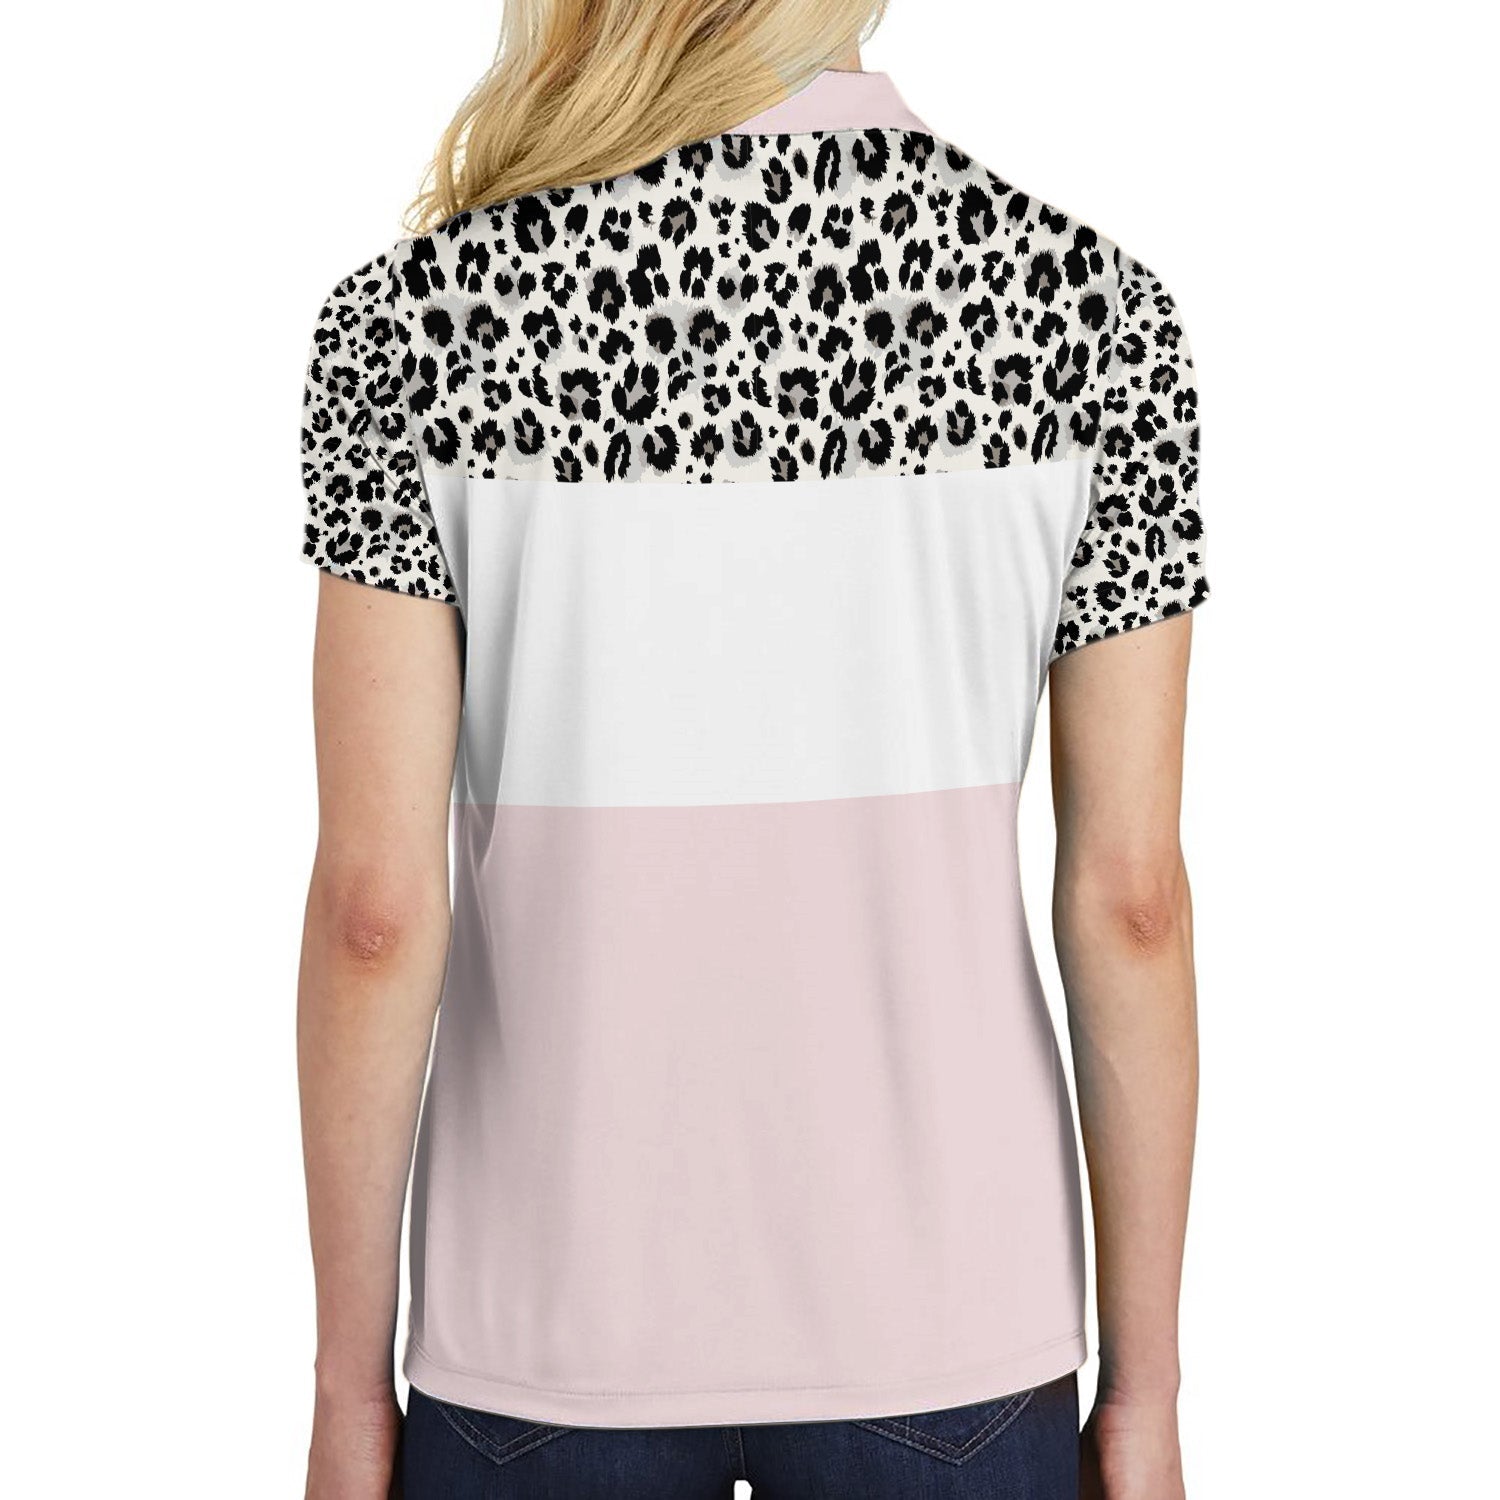 Plan For Bowling Short Sleeve Women Polo Shirt/ Leopard Pattern Polo Shirt For Ladies/ Best Bowling Gift For Female Coolspod